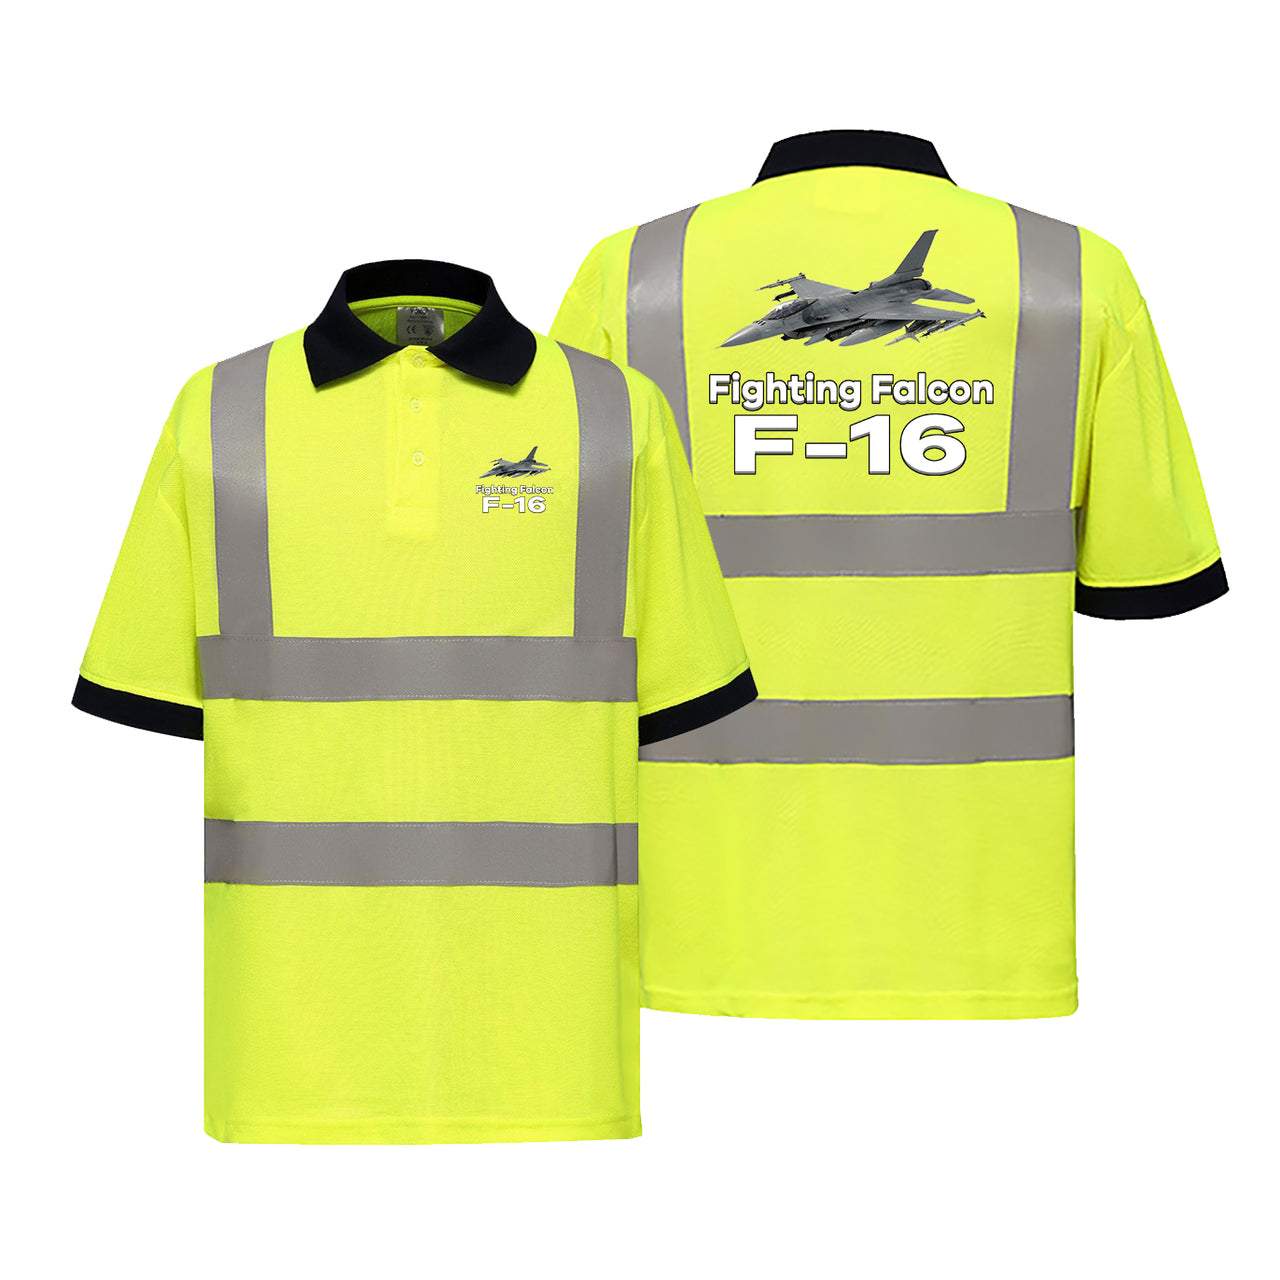 The Fighting Falcon F16 Designed Reflective Polo T-Shirts